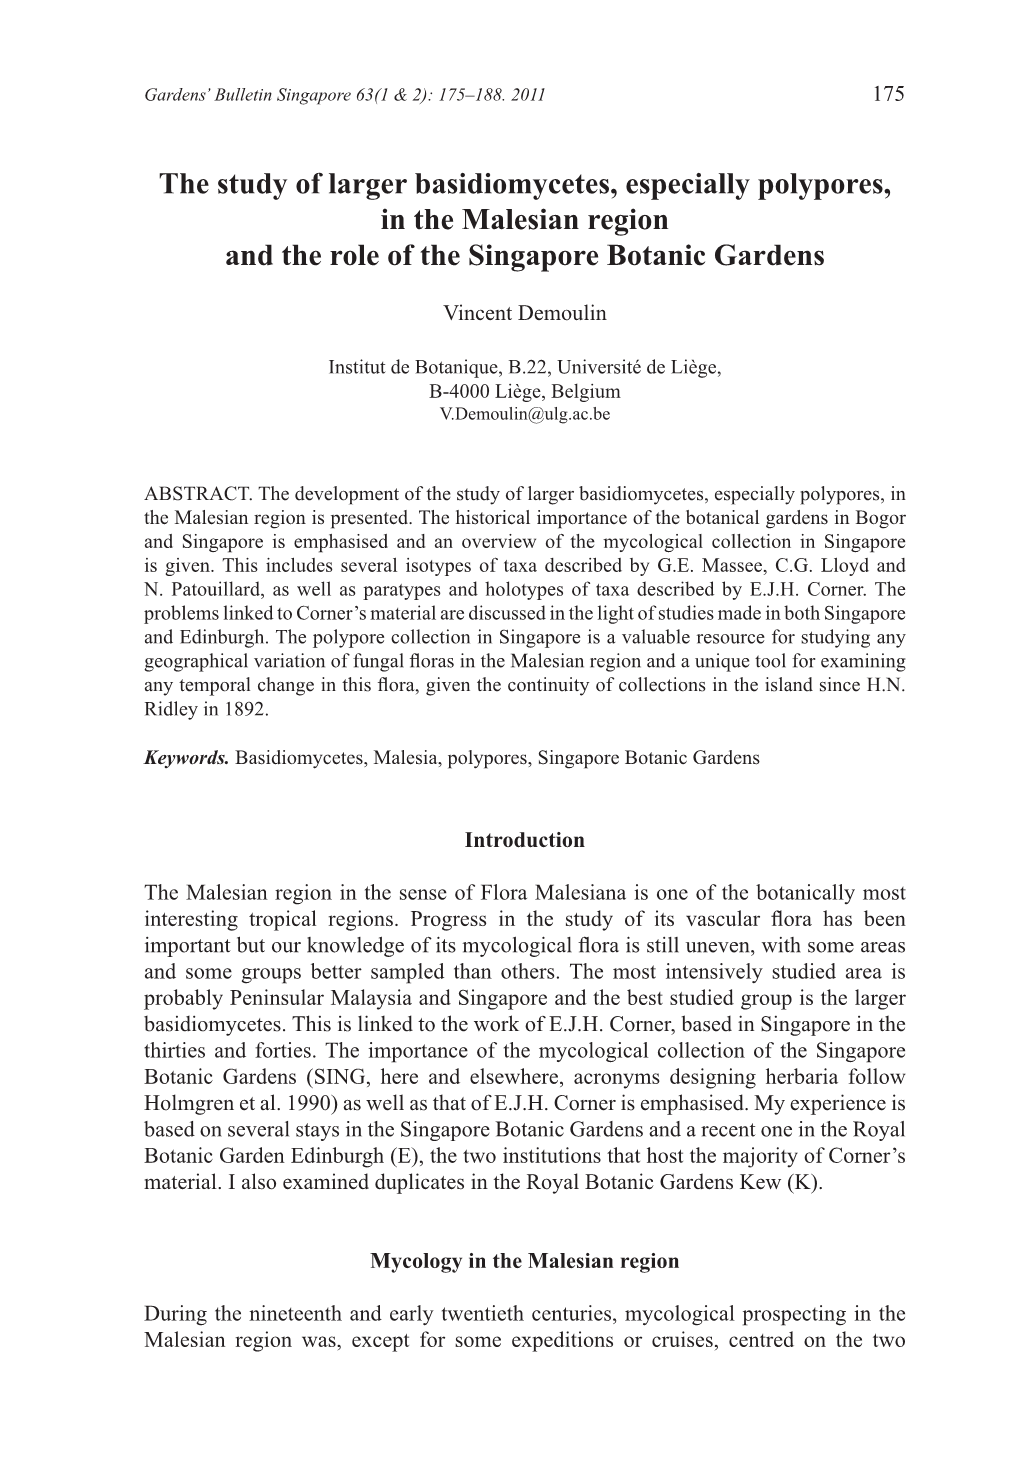 The Study of Larger Basidiomycetes, Especially Polypores, in the Malesian Region and the Role of the Singapore Botanic Gardens